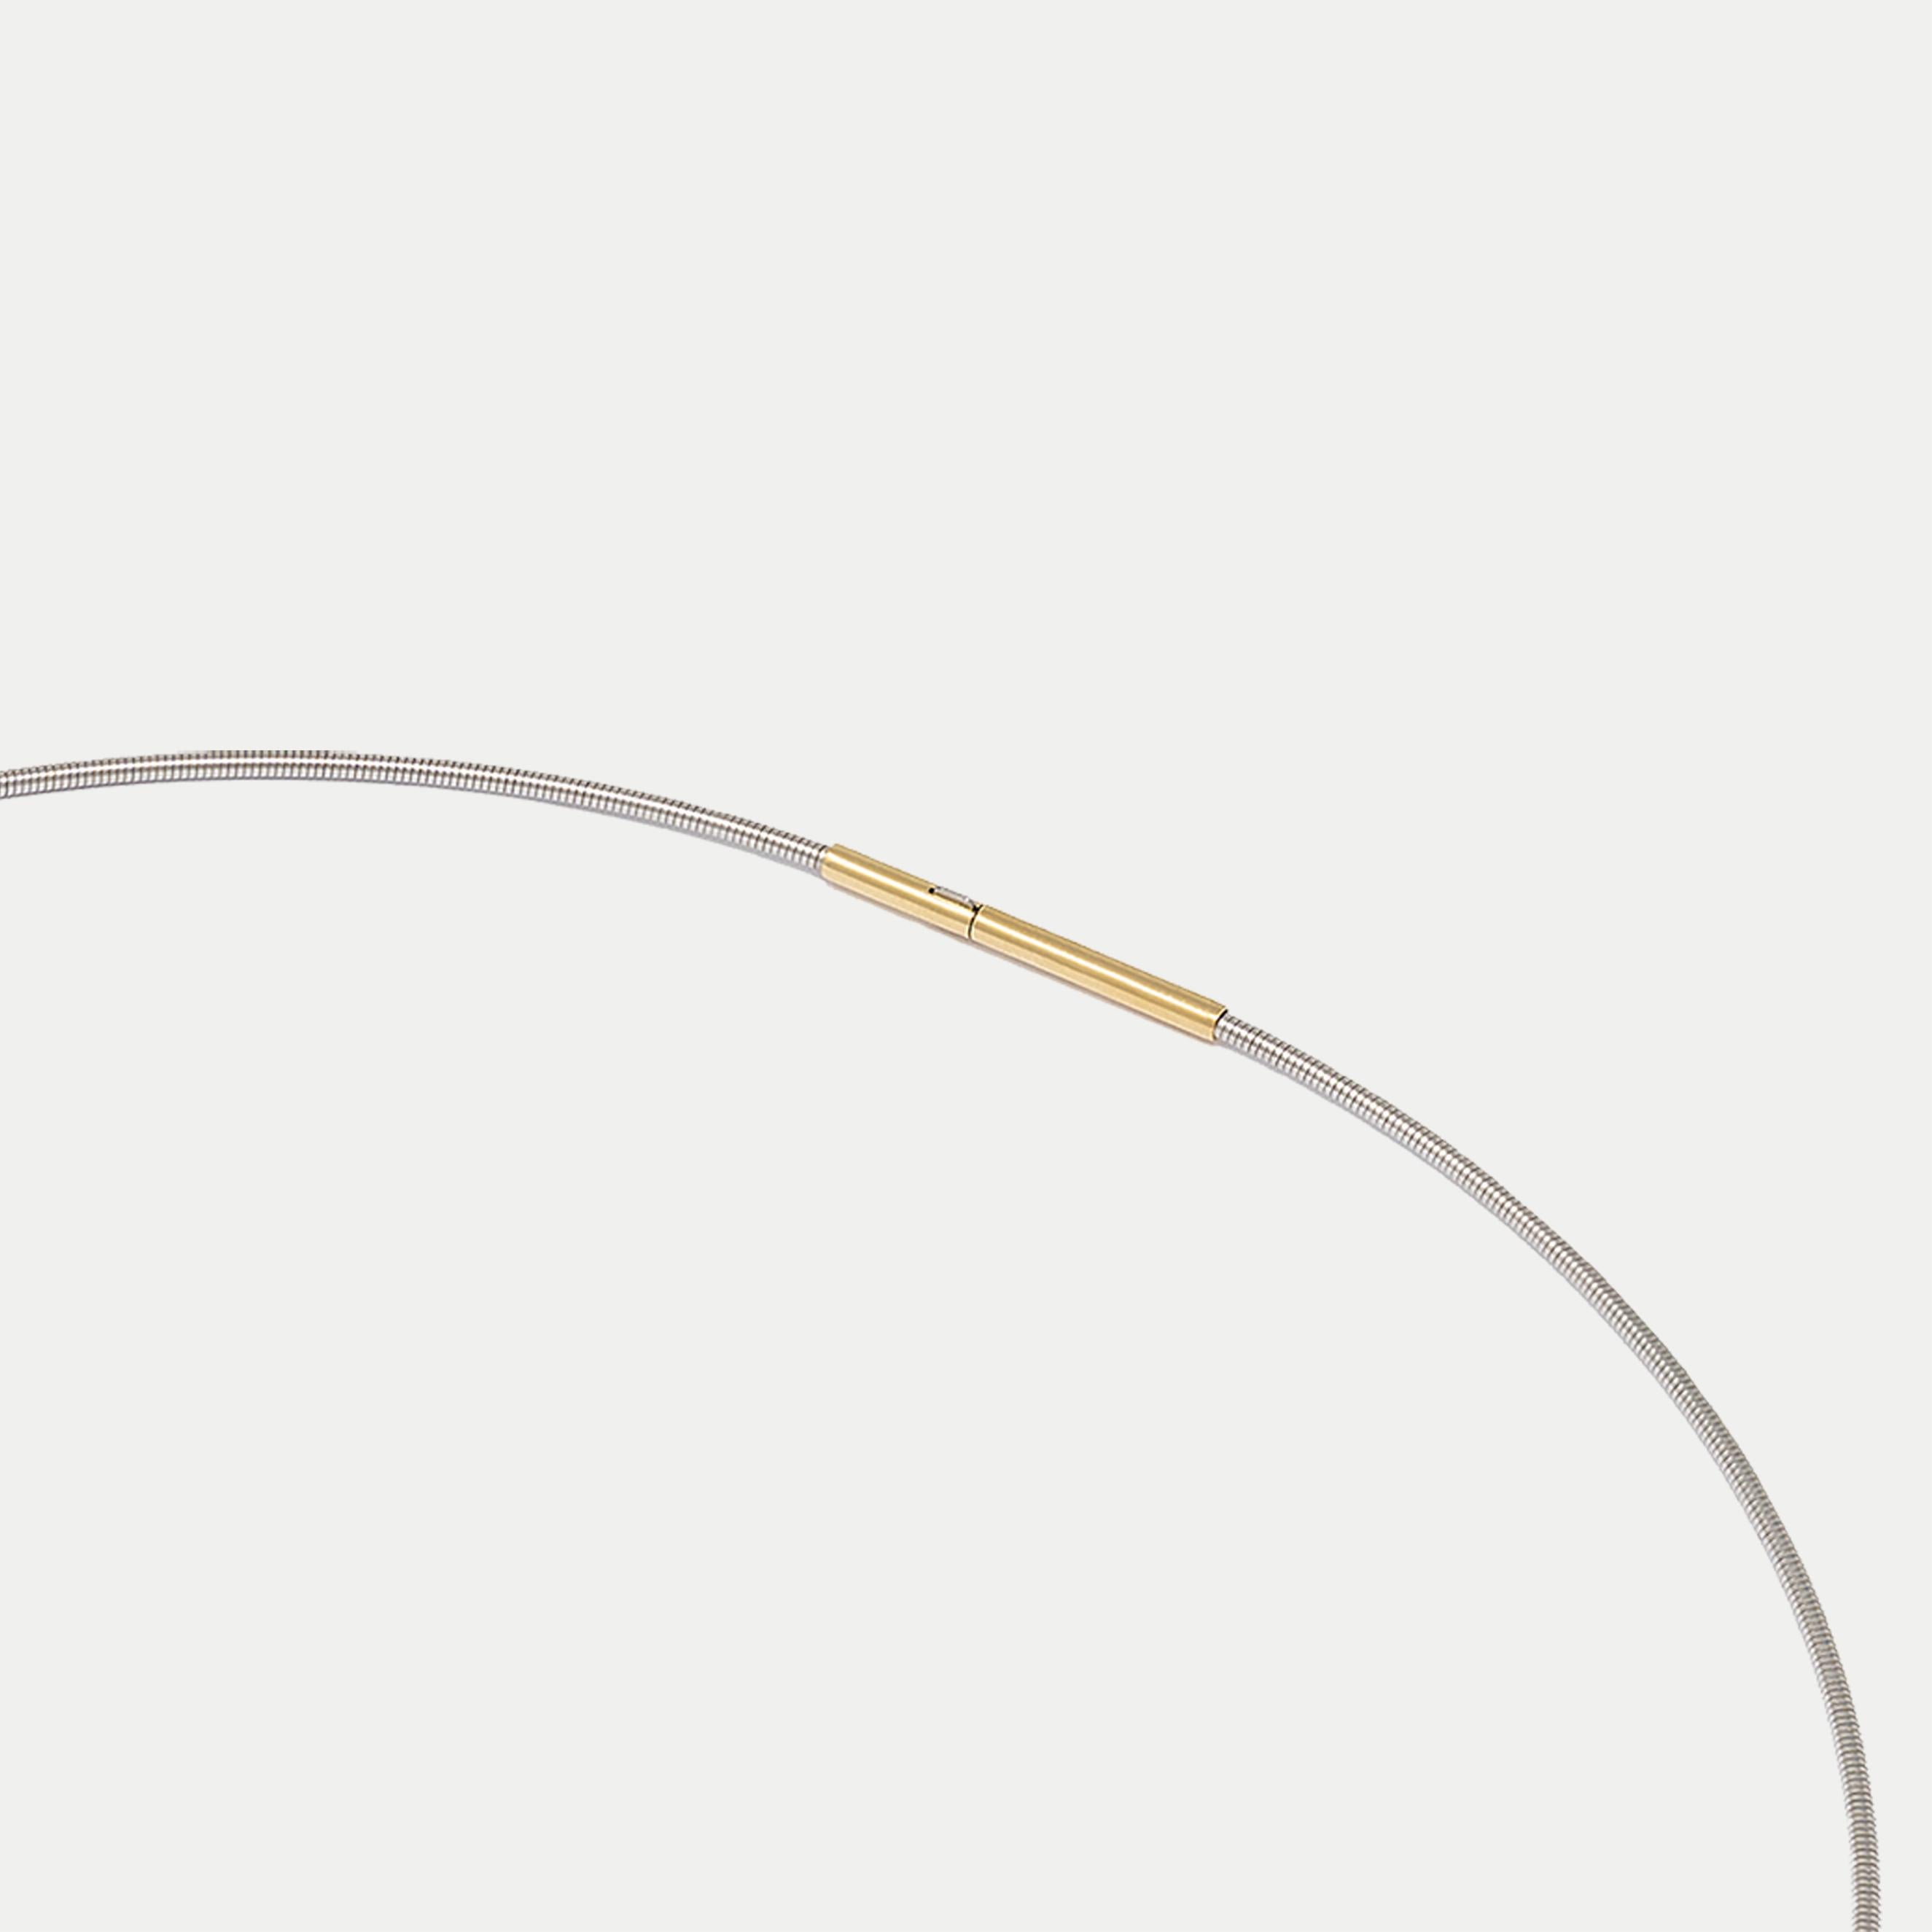 Flexible steel necklace with 18 carat yellow gold clasp (42 cm length)
Mosca pendant in 18 carat white gold

The owner decides how to wear this necklace: keep it simple and minimalist, wearing only the necklace or transform it into a more complex